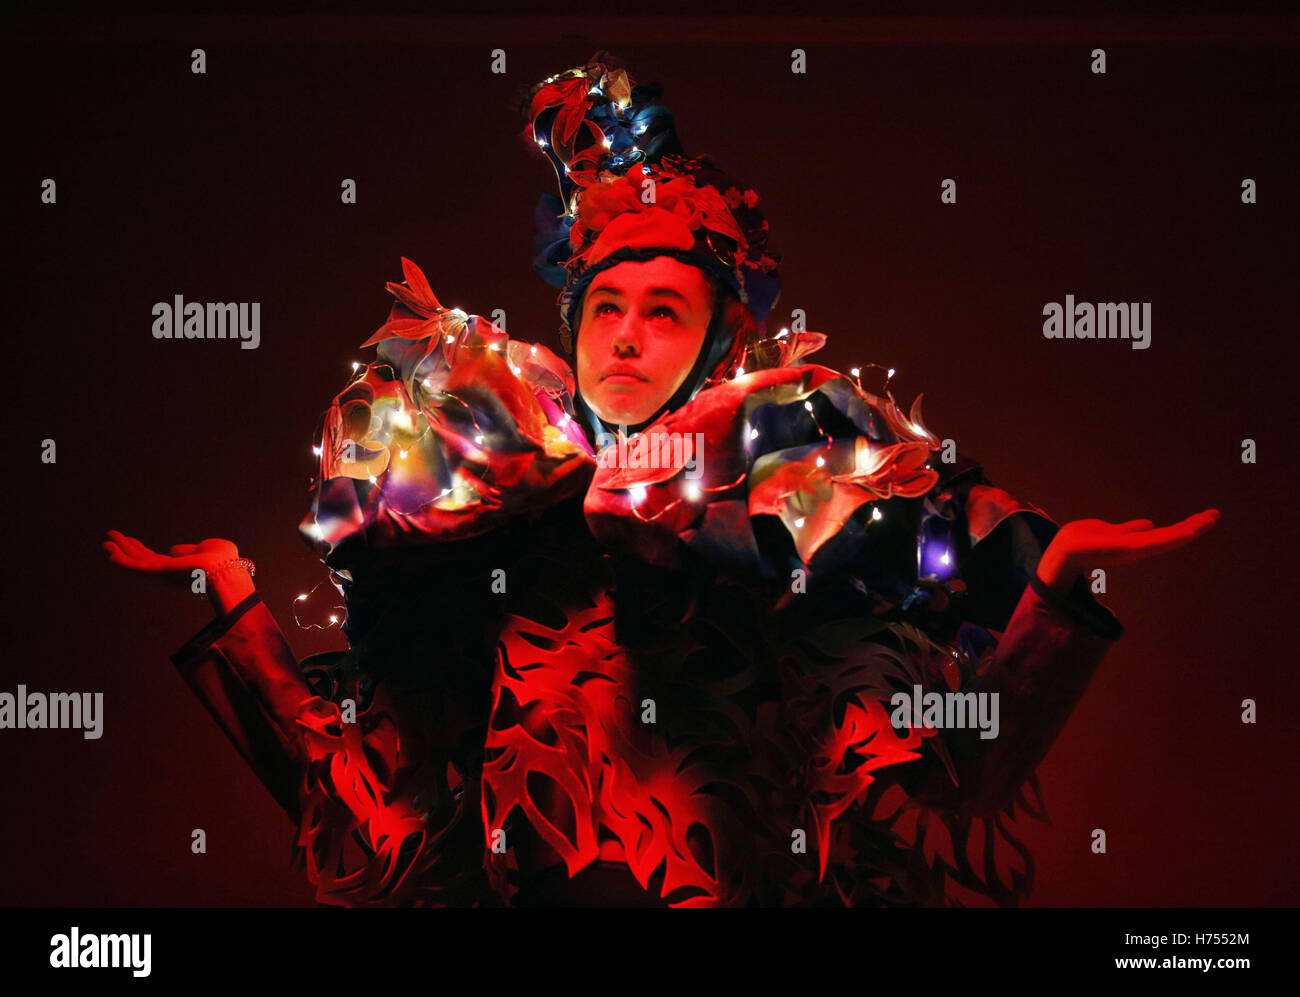 University of Edinburgh students wear outfits adorned with lights, mirrors and bells to mark the Indian Festival of Diwali in Edinburgh. Stock Photo